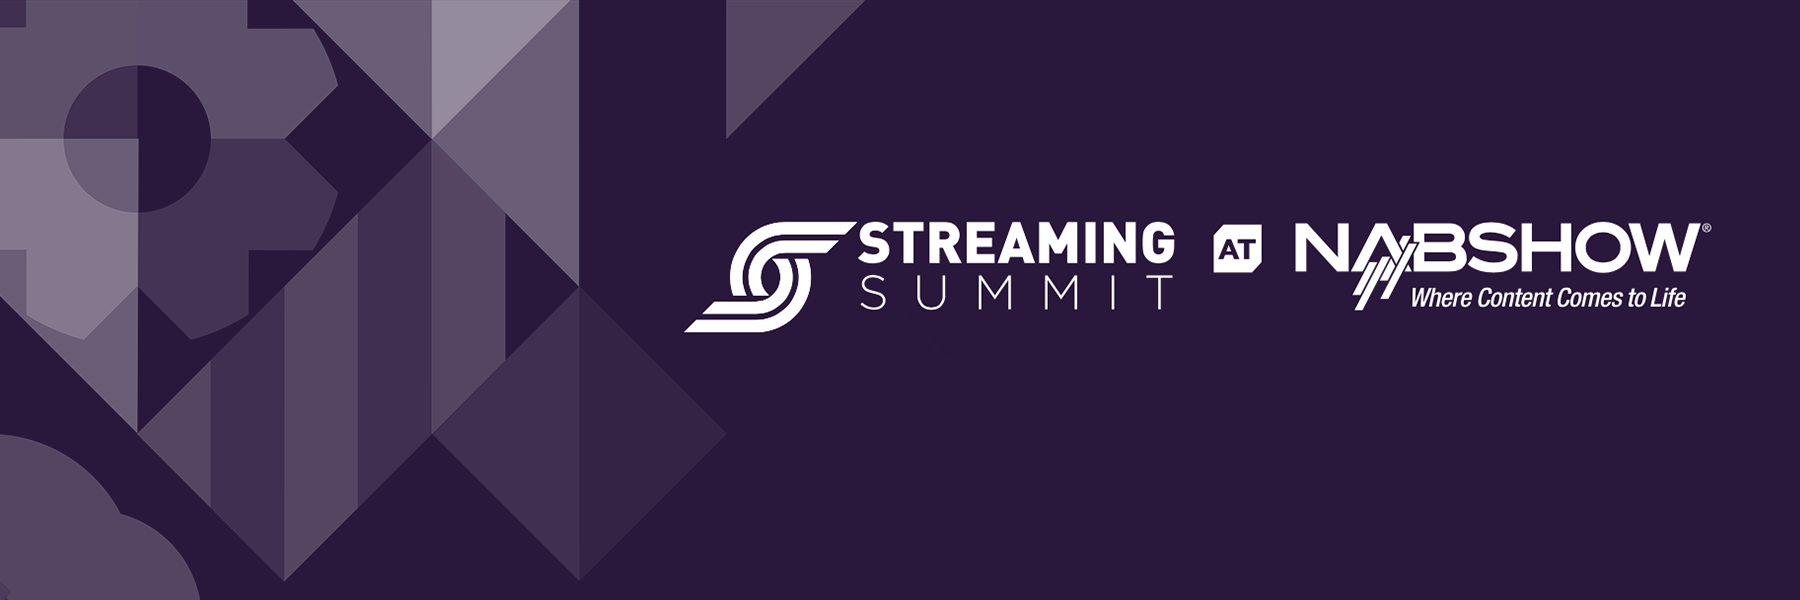 Optimizing OTT Delivery – Perspective After the Streaming Summit at NAB